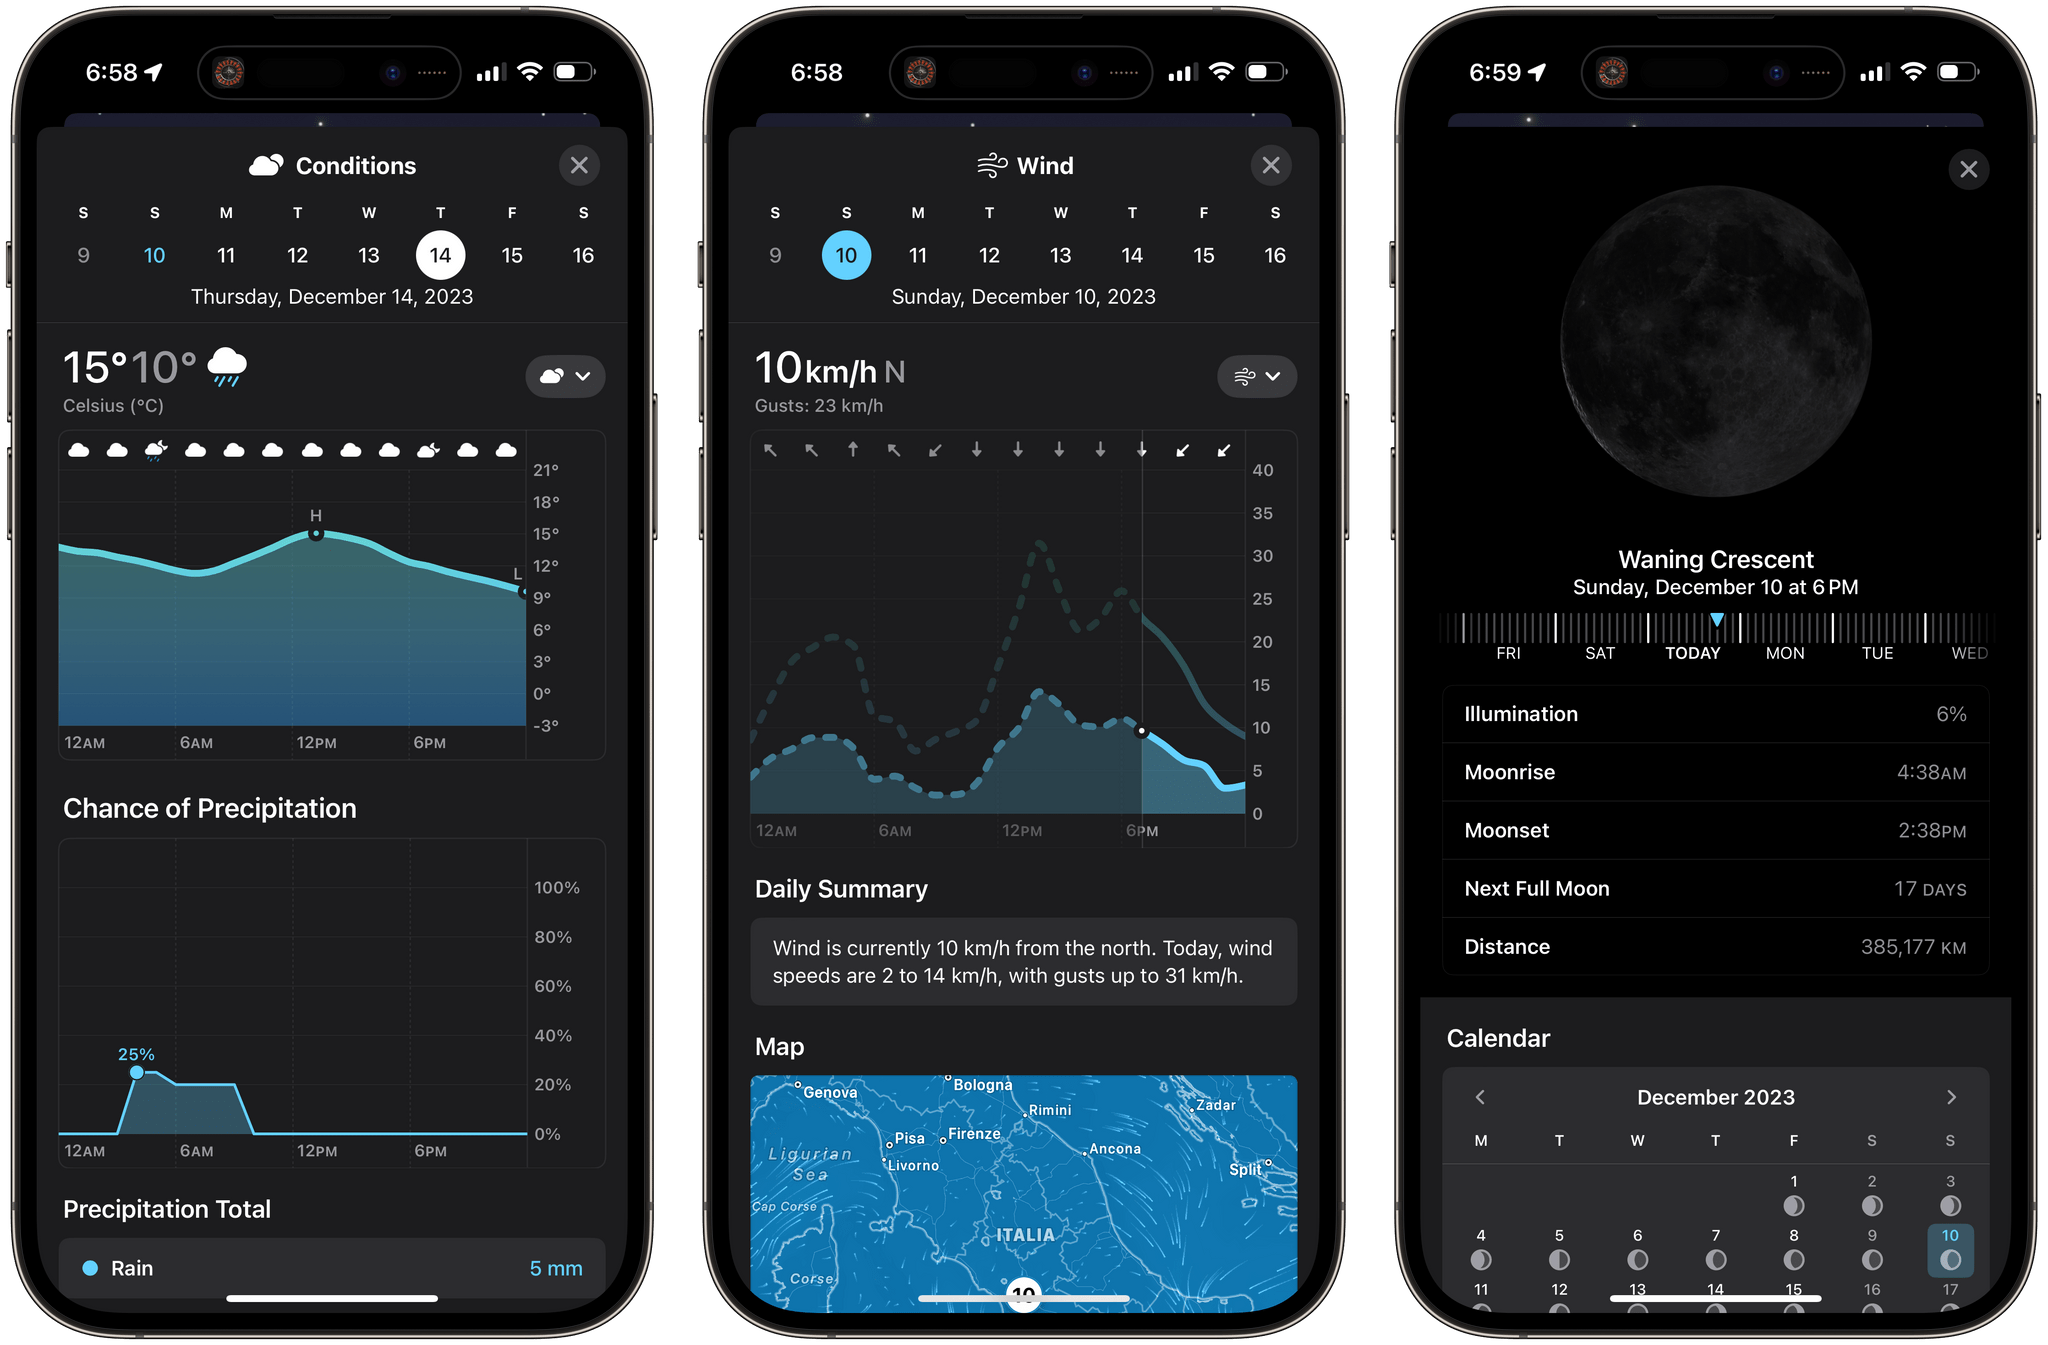 New data points in the Weather app.